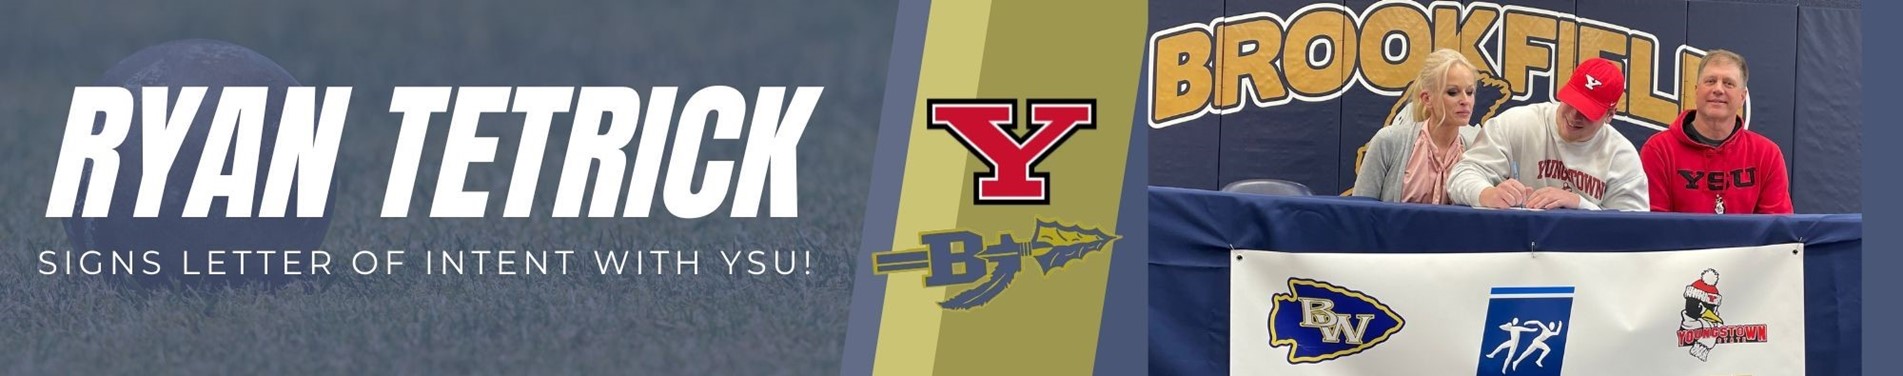 Ryan Tetrick signs letter of intent with YSU